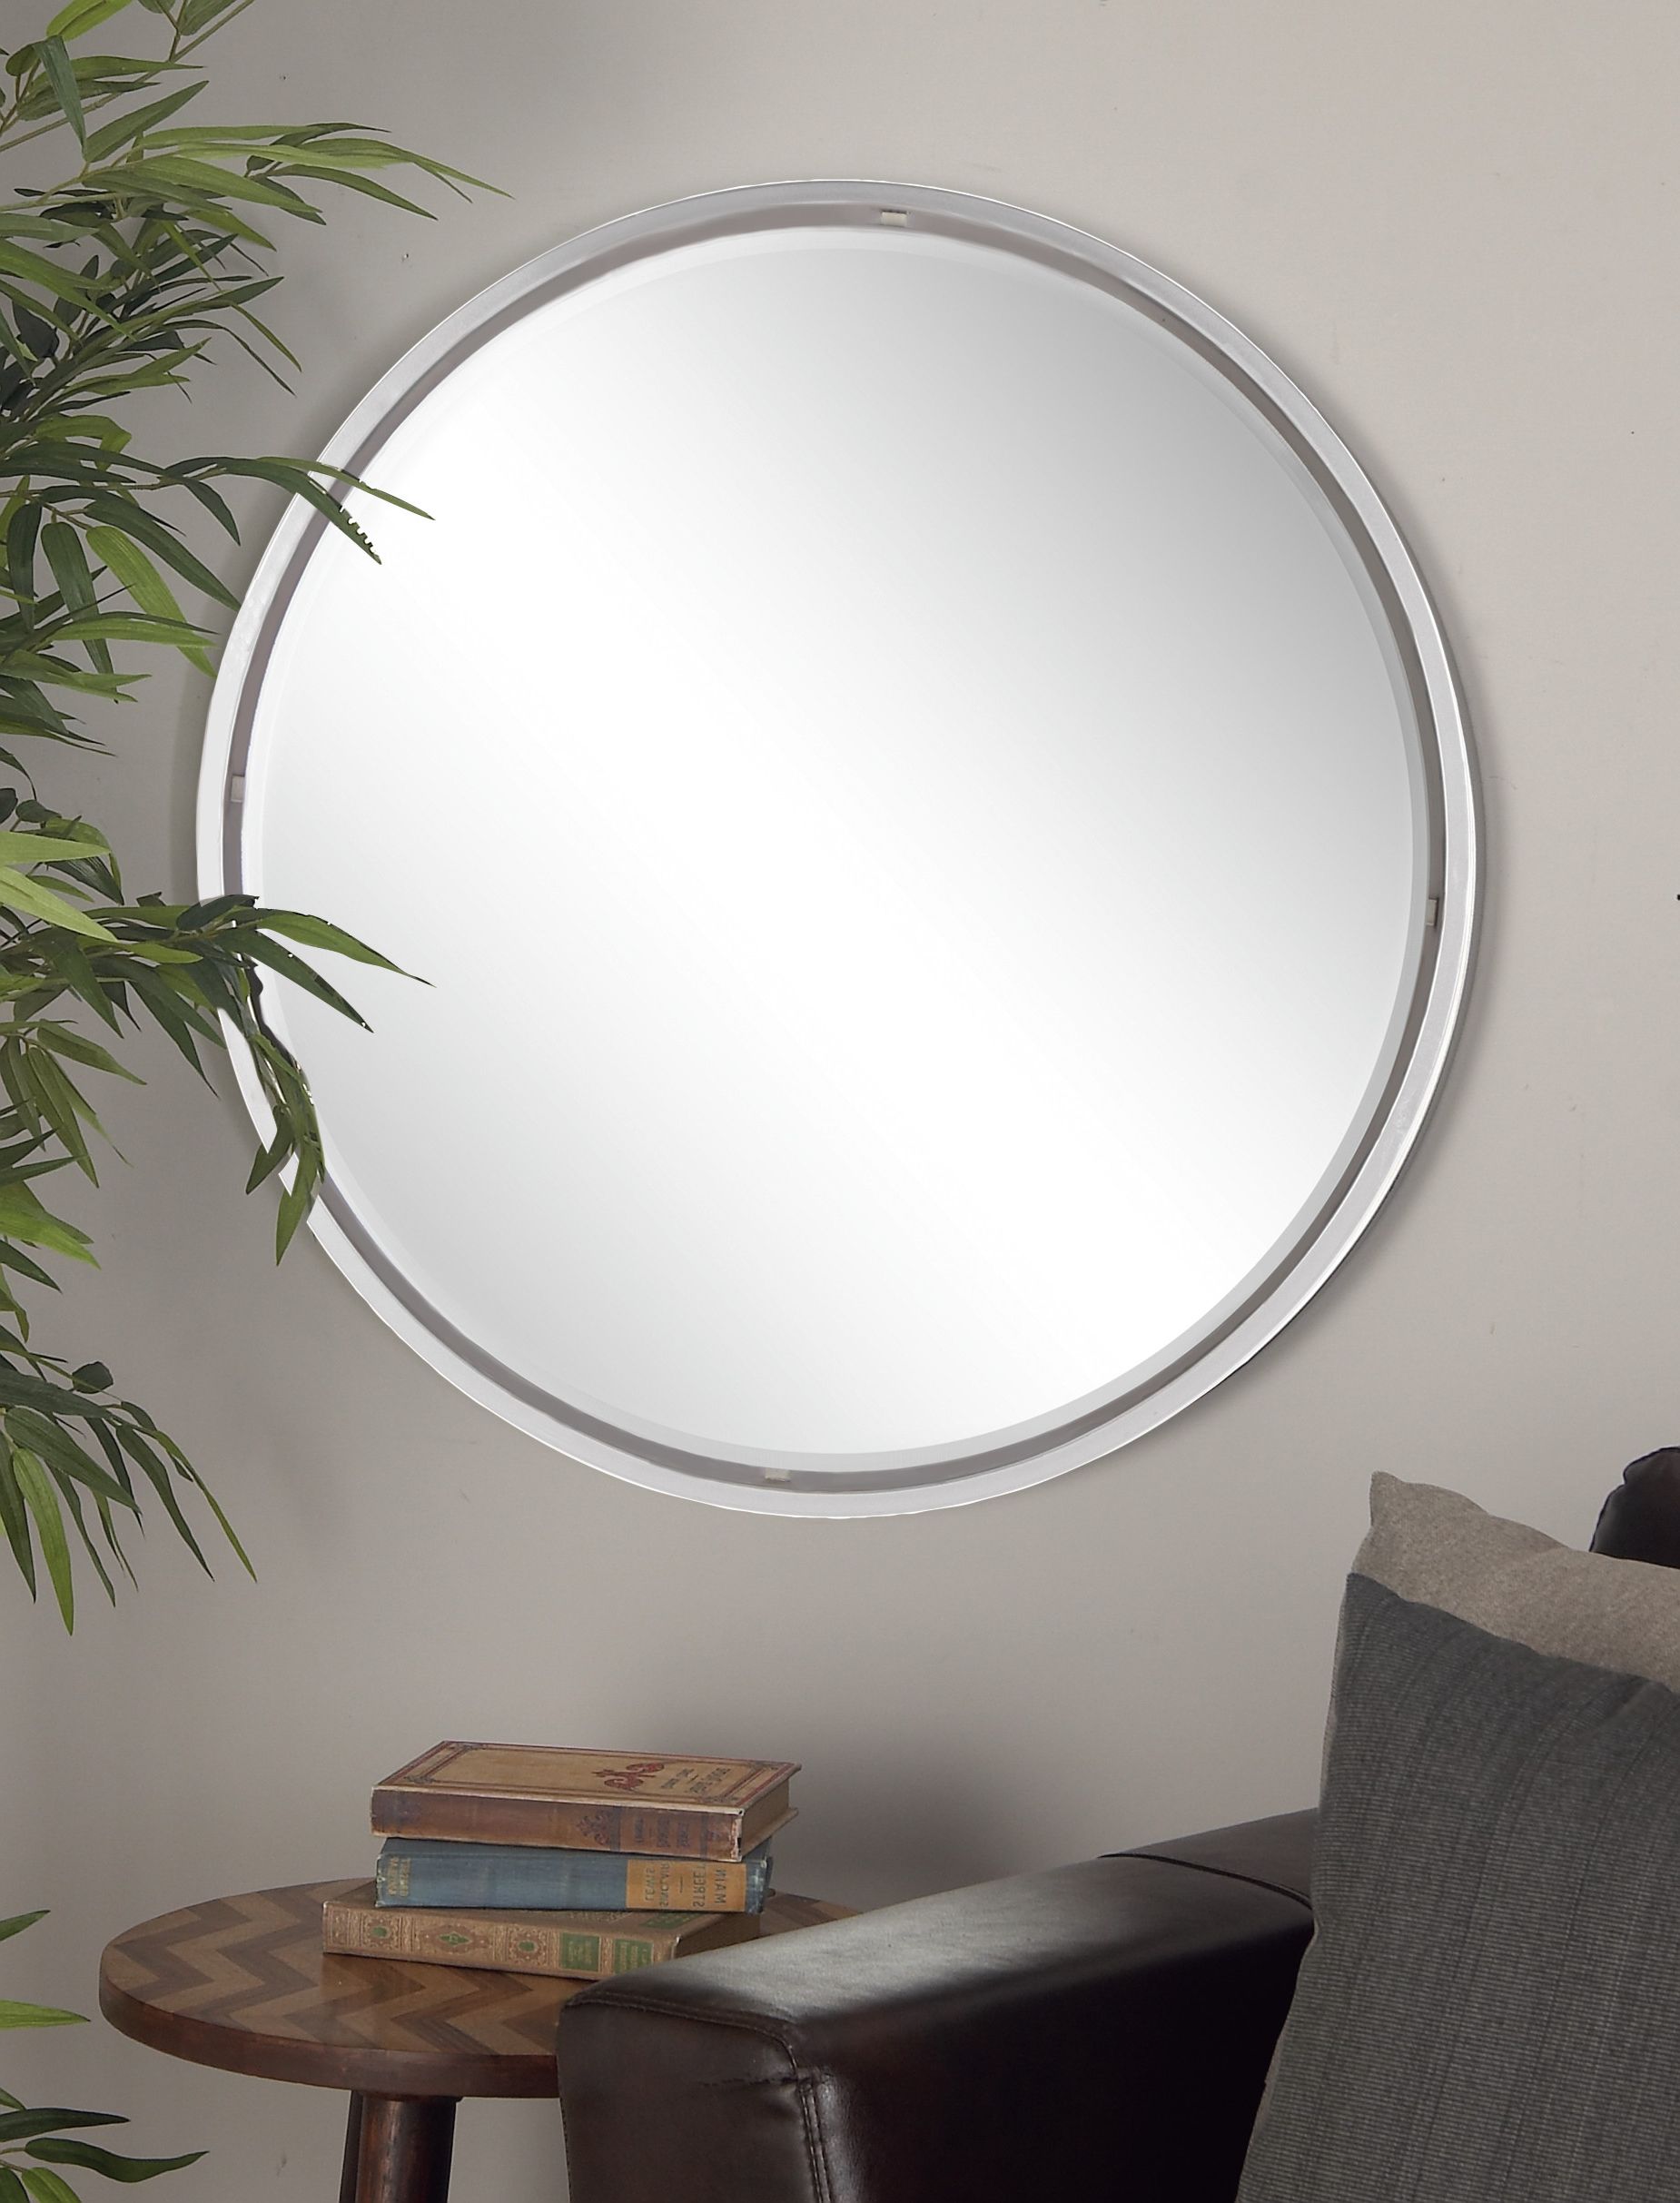 2020 Decmode Extra Large Round Silver Wall Mirror, 30" – Walmart Intended For Round Scalloped Wall Mirrors (View 1 of 15)